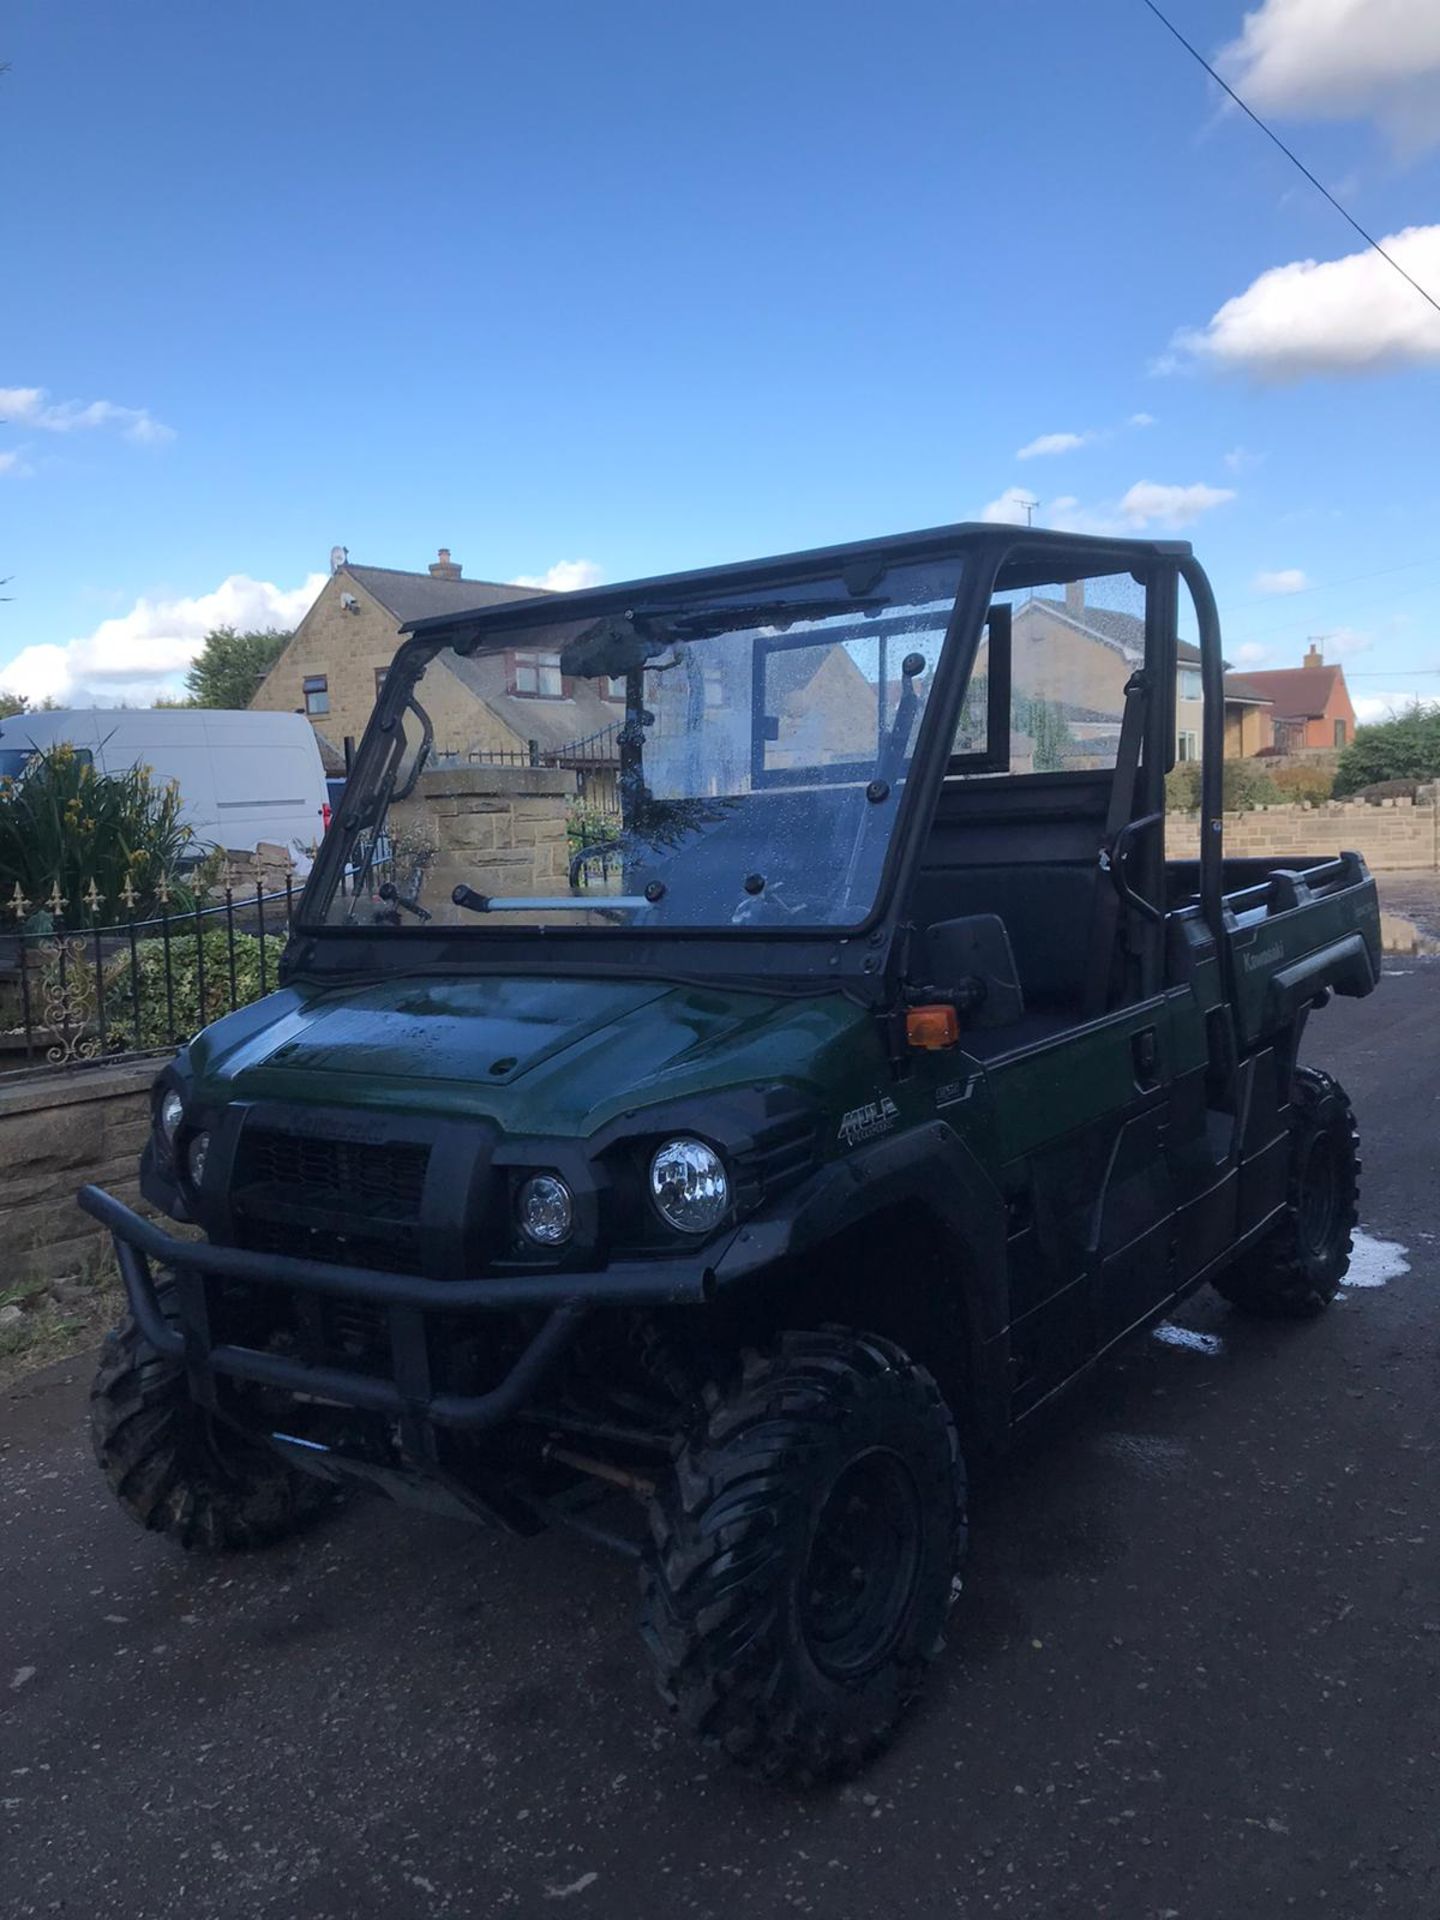 2016 KAWASAKI MULE PRO DX, ROAD REGISTERED, RUNS AND DRIVES WELL, TIPPER BODY *PLUS VAT* - Image 2 of 5